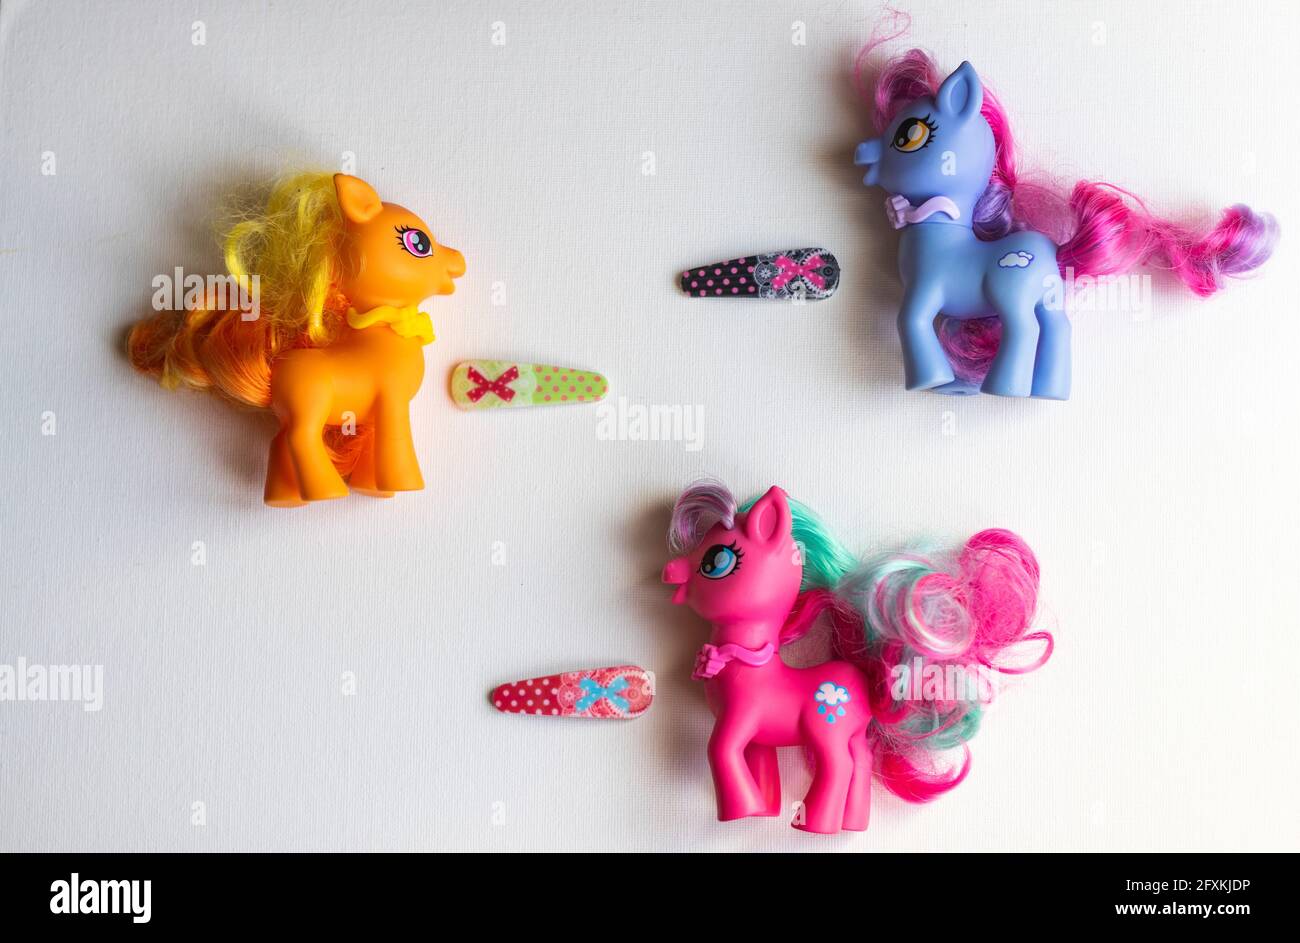 Toy Ponies High Resolution Stock Photography and Images - Alamy